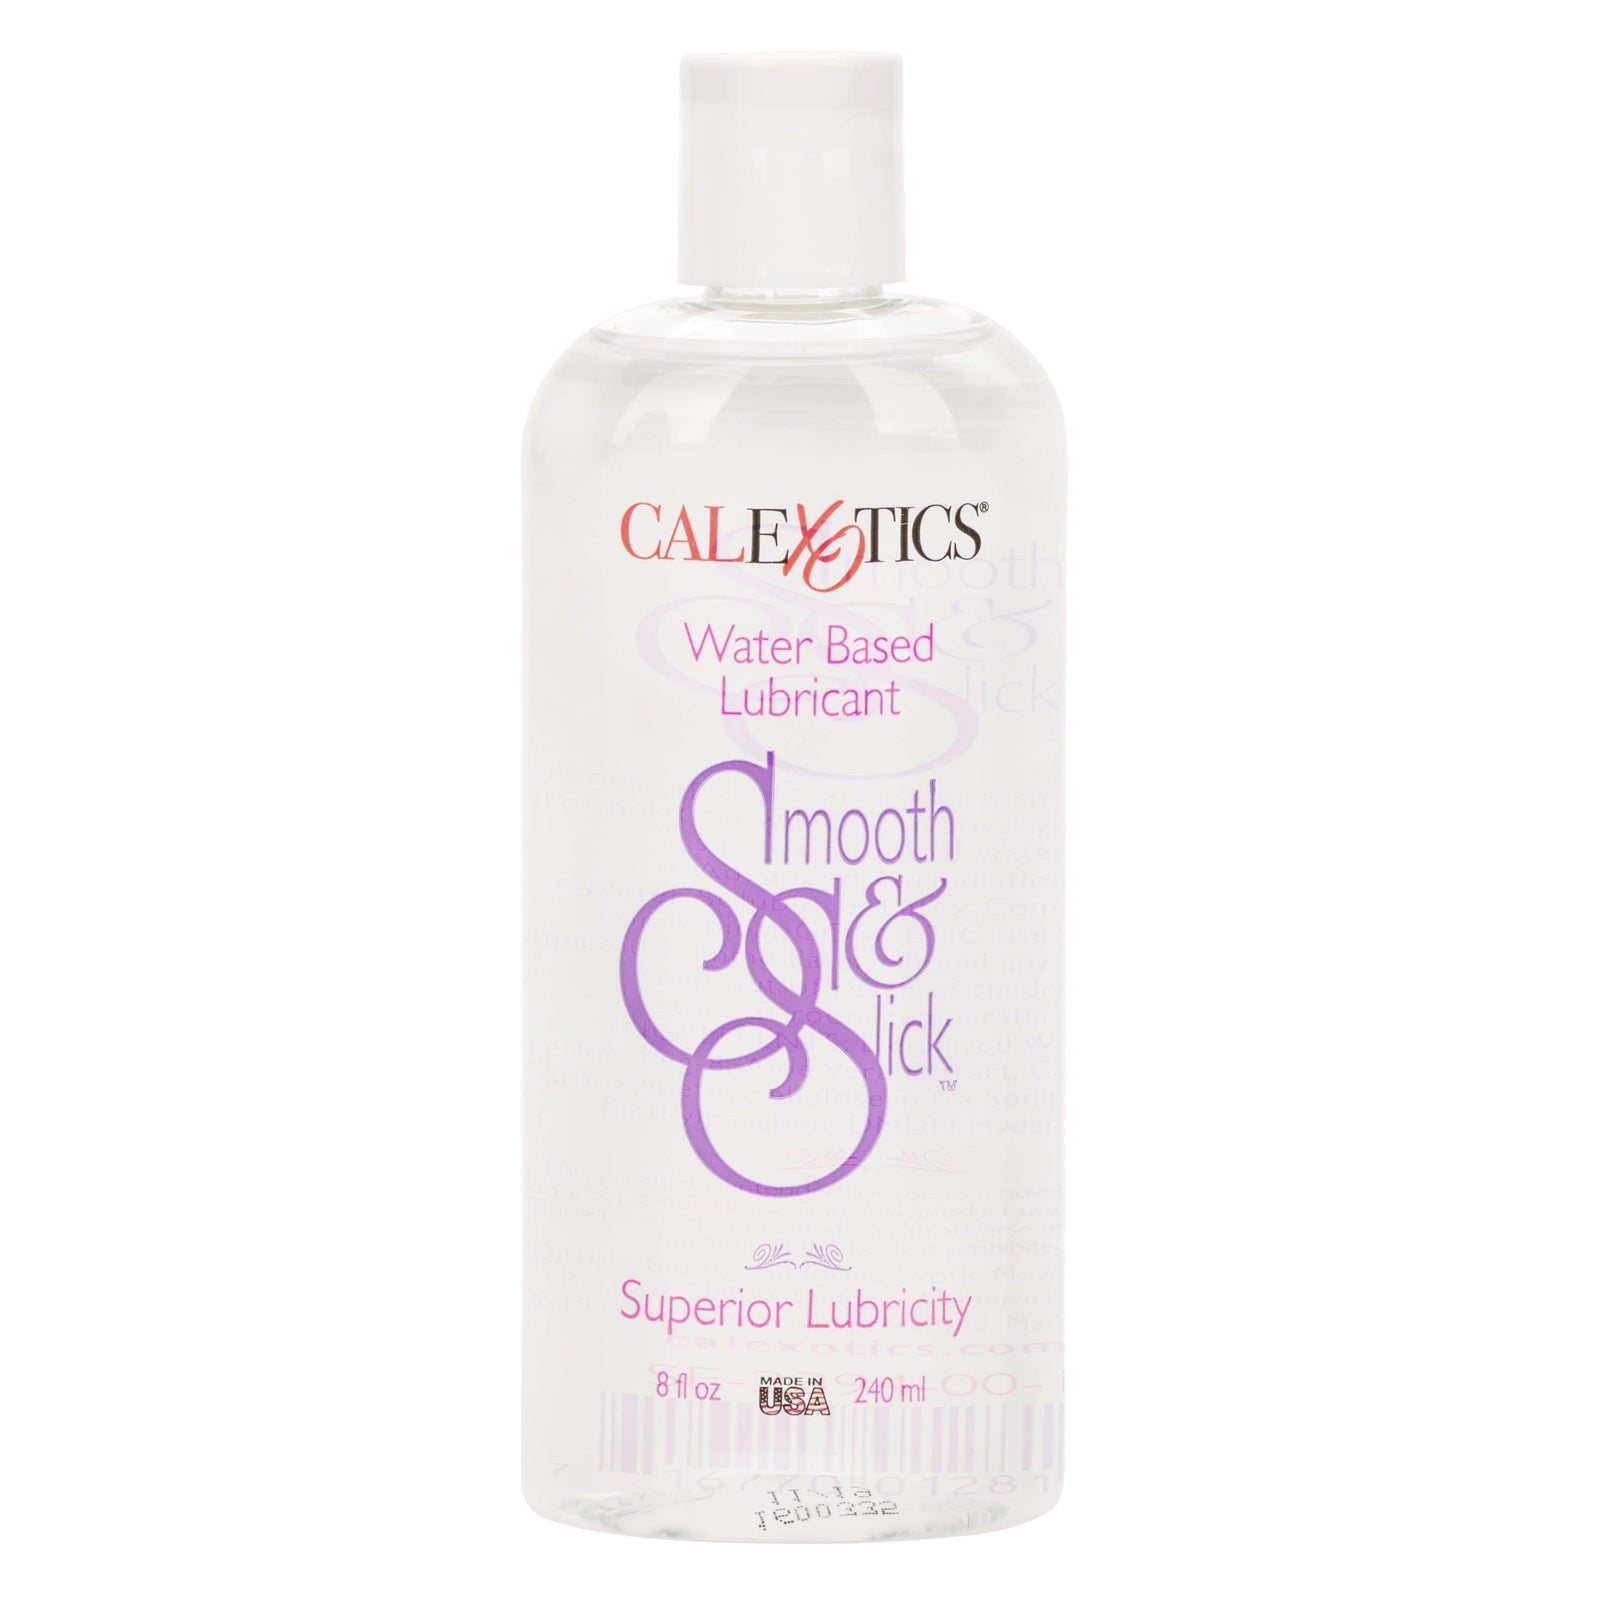 California Exotics - Smooth and Slick Water Based Lubricant 240ml Lube (Water Based) Durio Asia